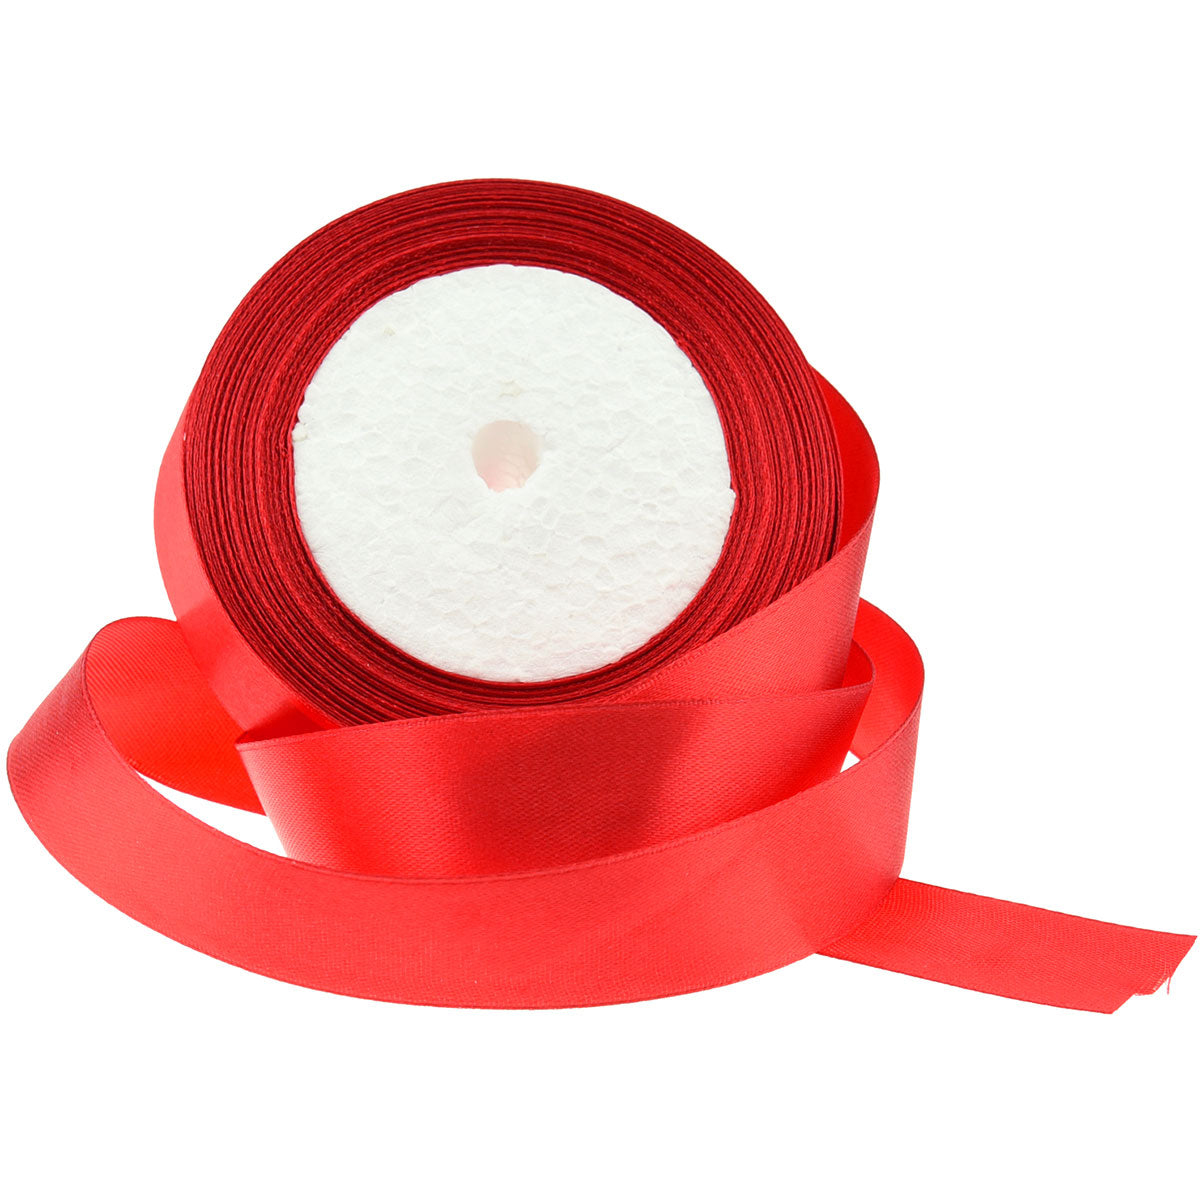 20mm Red Single Sided Satin Ribbon